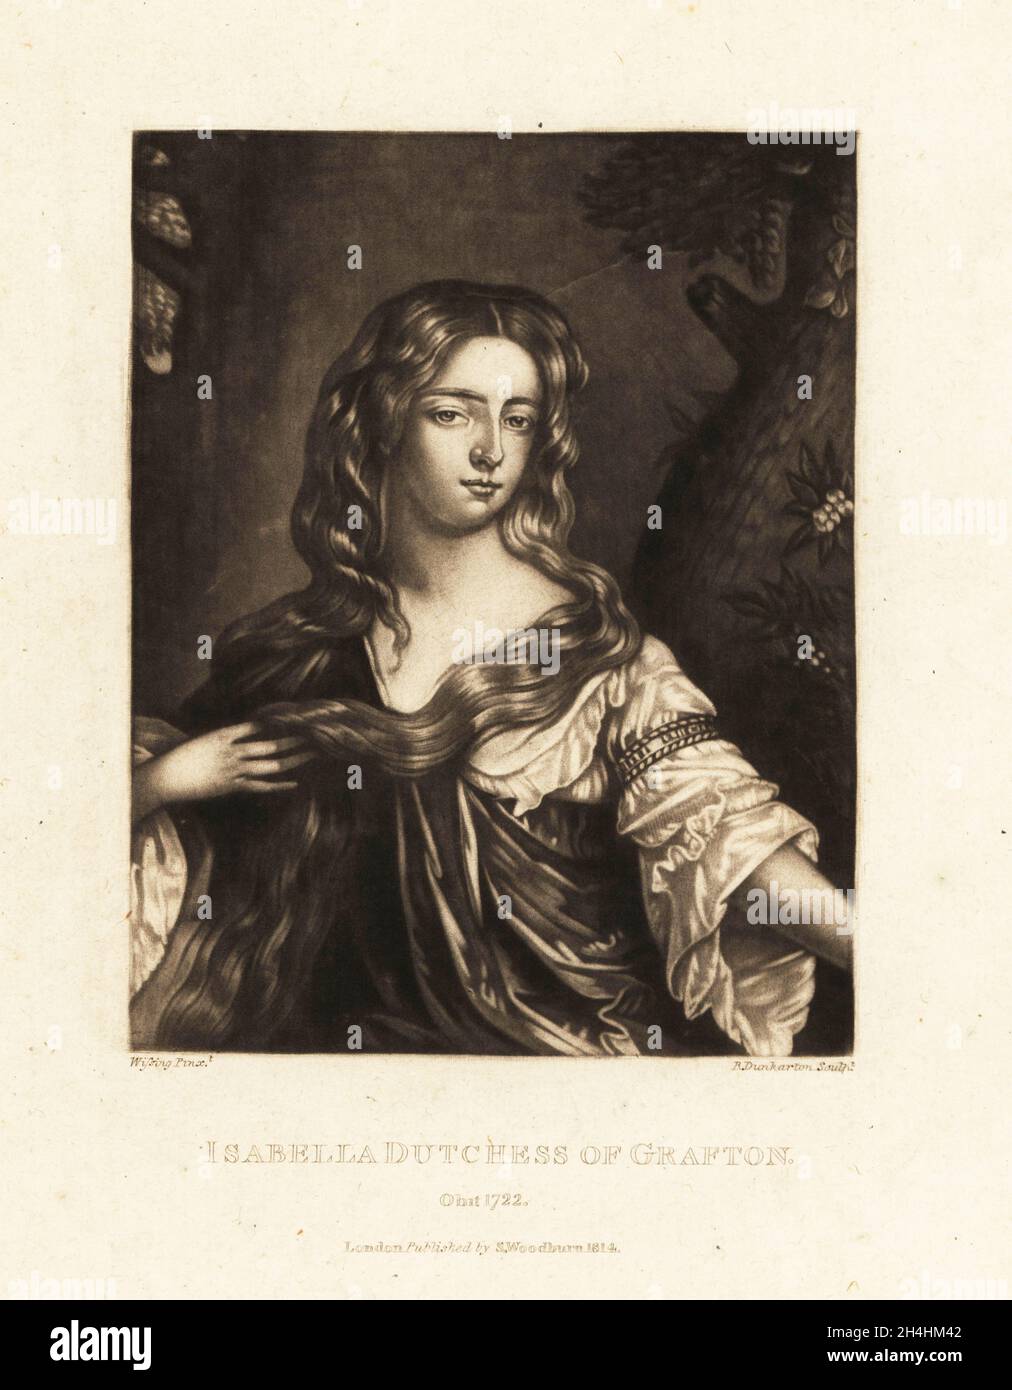 Isabella Fitzroy, Duchess of Grafton, one of the Hampton Court Beauties, c.1668-1723. Wife of Henry Fitzroy, Duke of Grafton, illegitimate son of King Charles II and Barbara Villiers. Mezzotint engraving by Robert Dunkarton after a portrait by Willem Wissing from Richard Earlom and Charles Turner's Portraits of Characters Illustrious in British History Engraved in Mezzotinto, published by S. Woodburn, London, 1814. Stock Photo